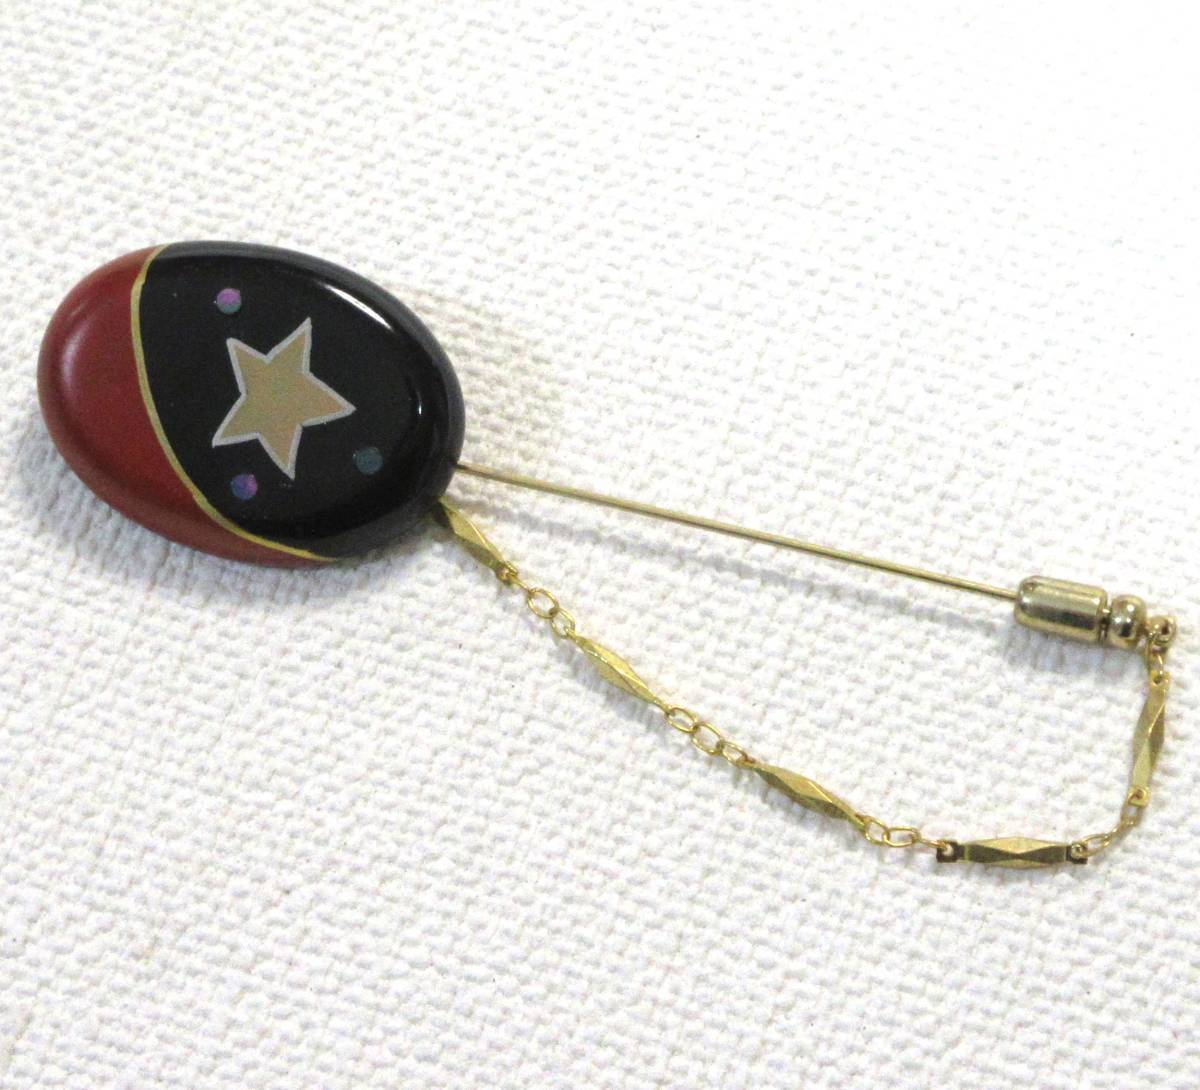 ★Beauty of makie★Wooden lacquered pin brooch black star makie ★Hand-painted makie★Free shipping, ladies accessories, brooch, others